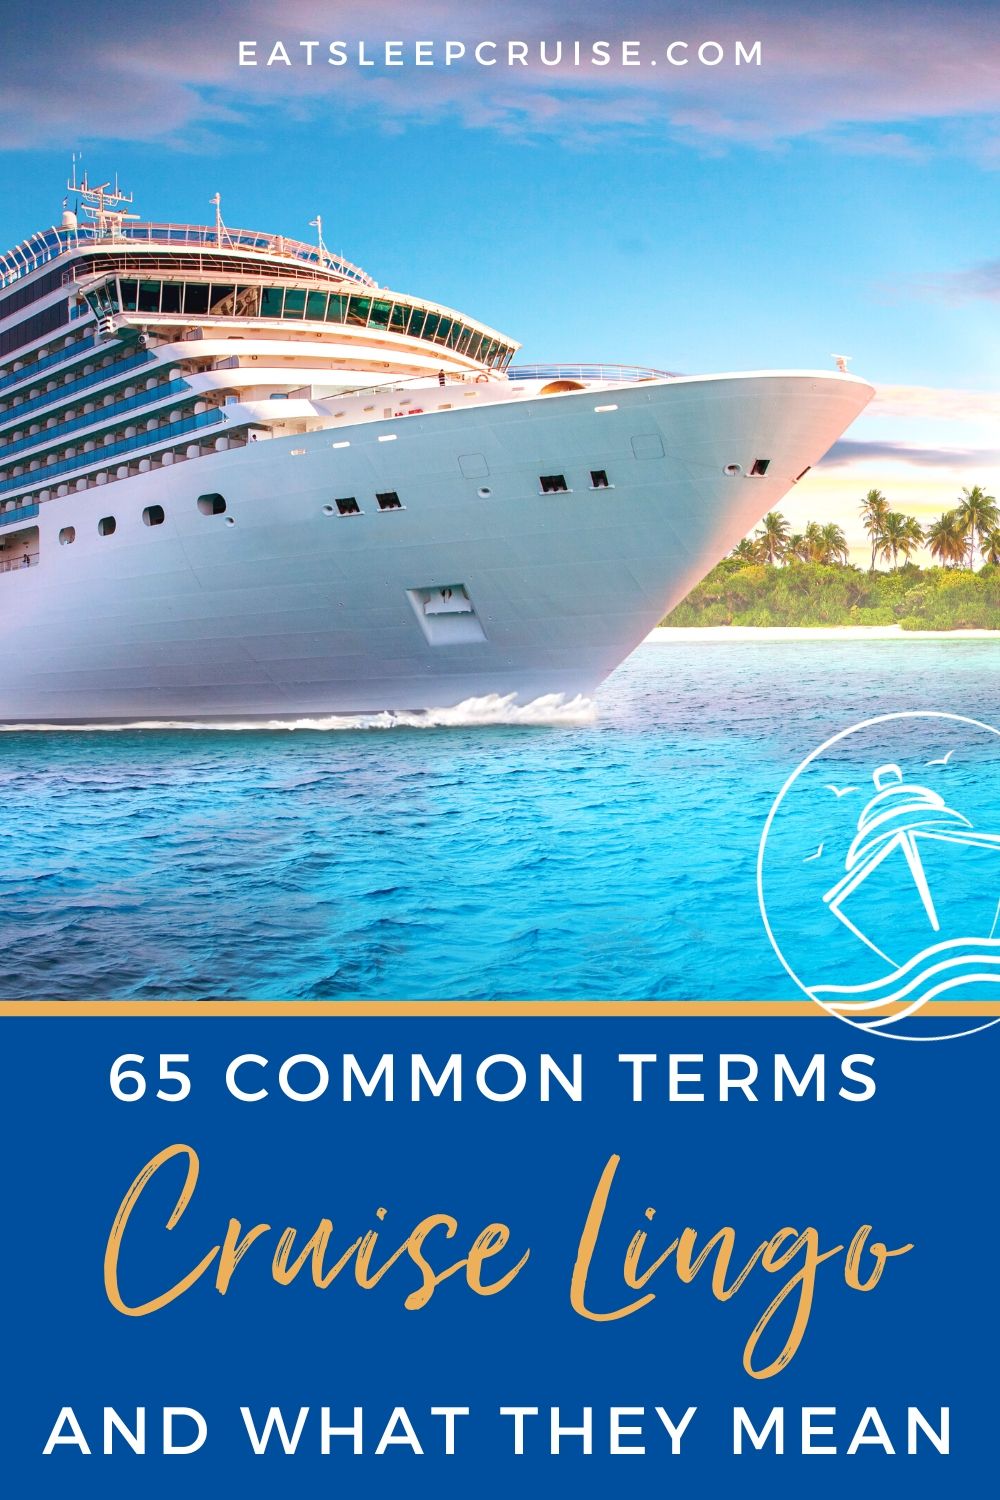 cruise meaning in slang